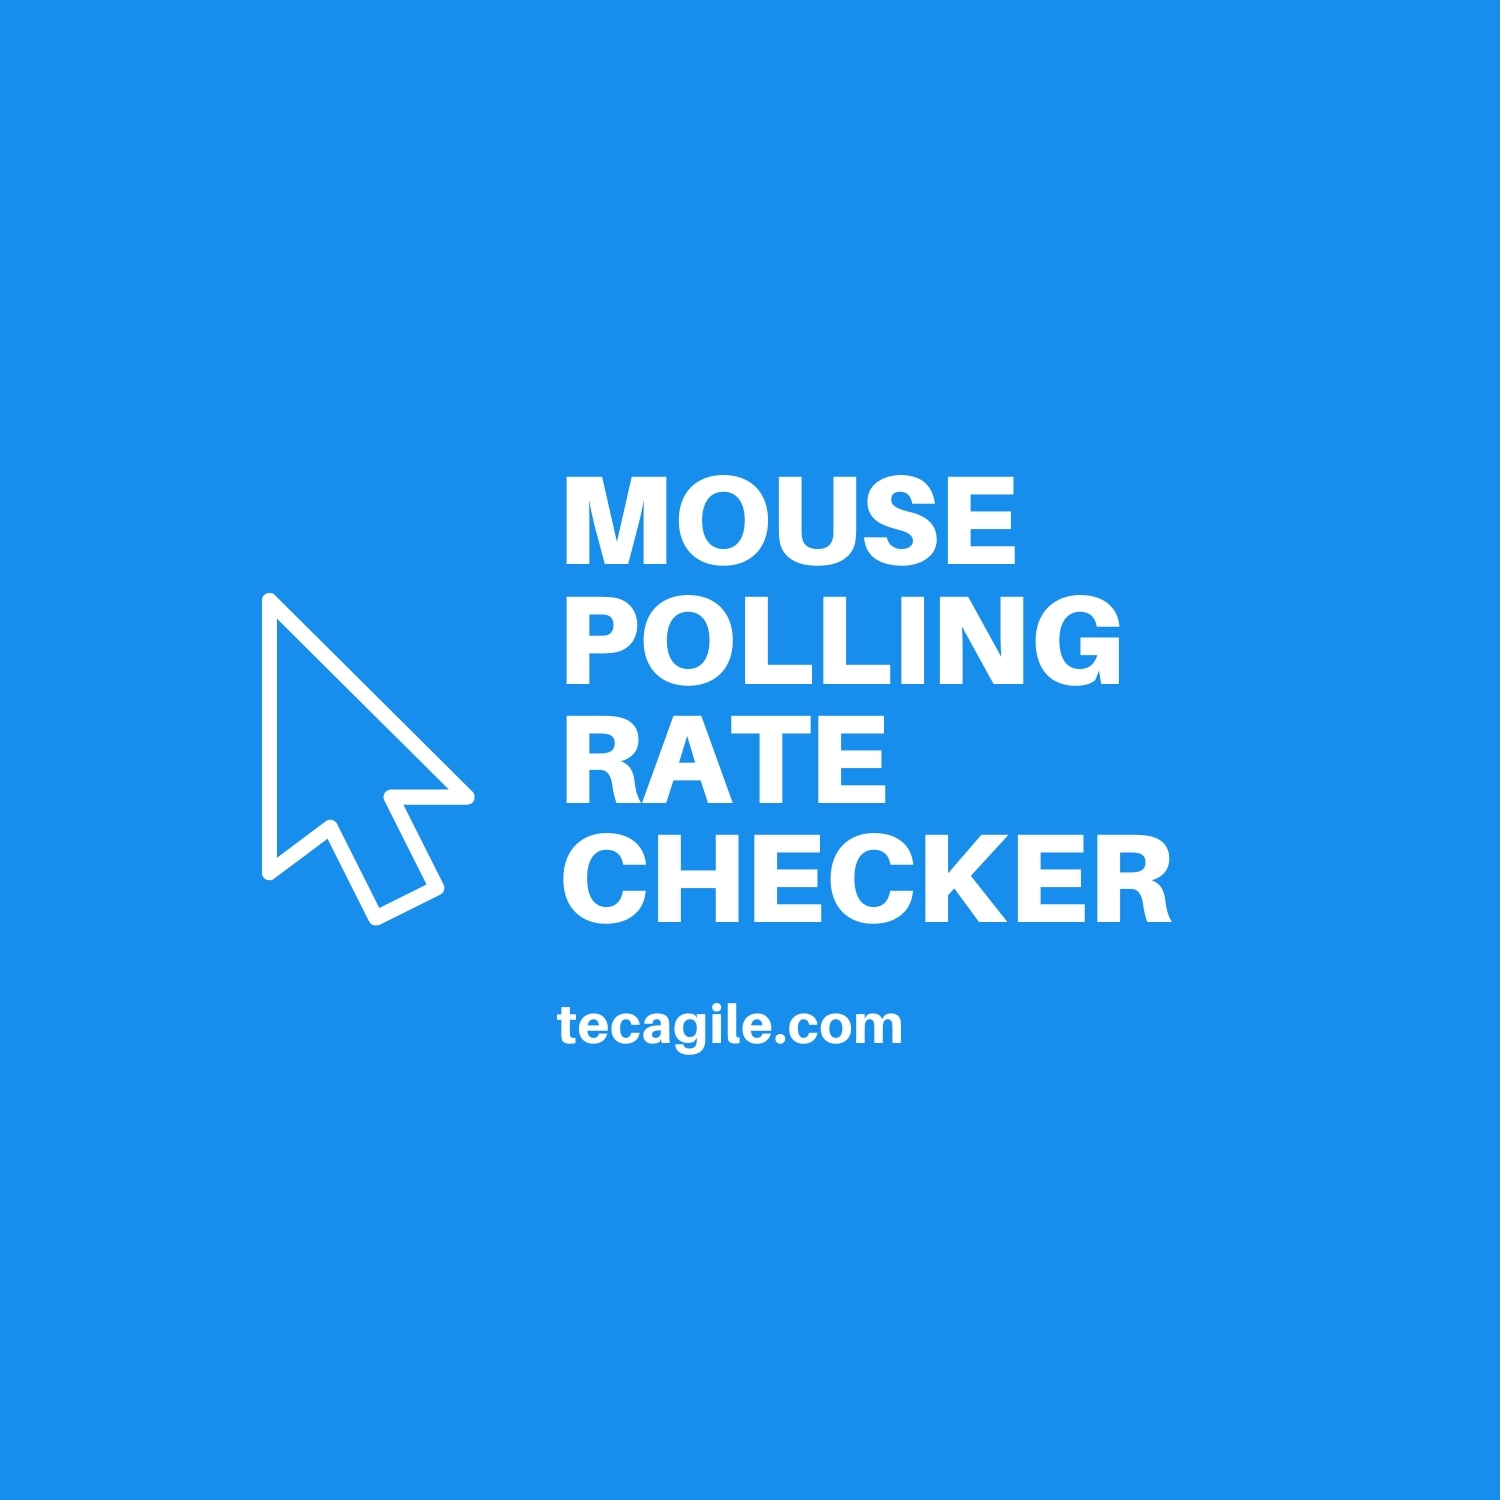 Mount Vesuvius Critical repertoire Online Mouse Rate Checker & Polling Rate Test For Free